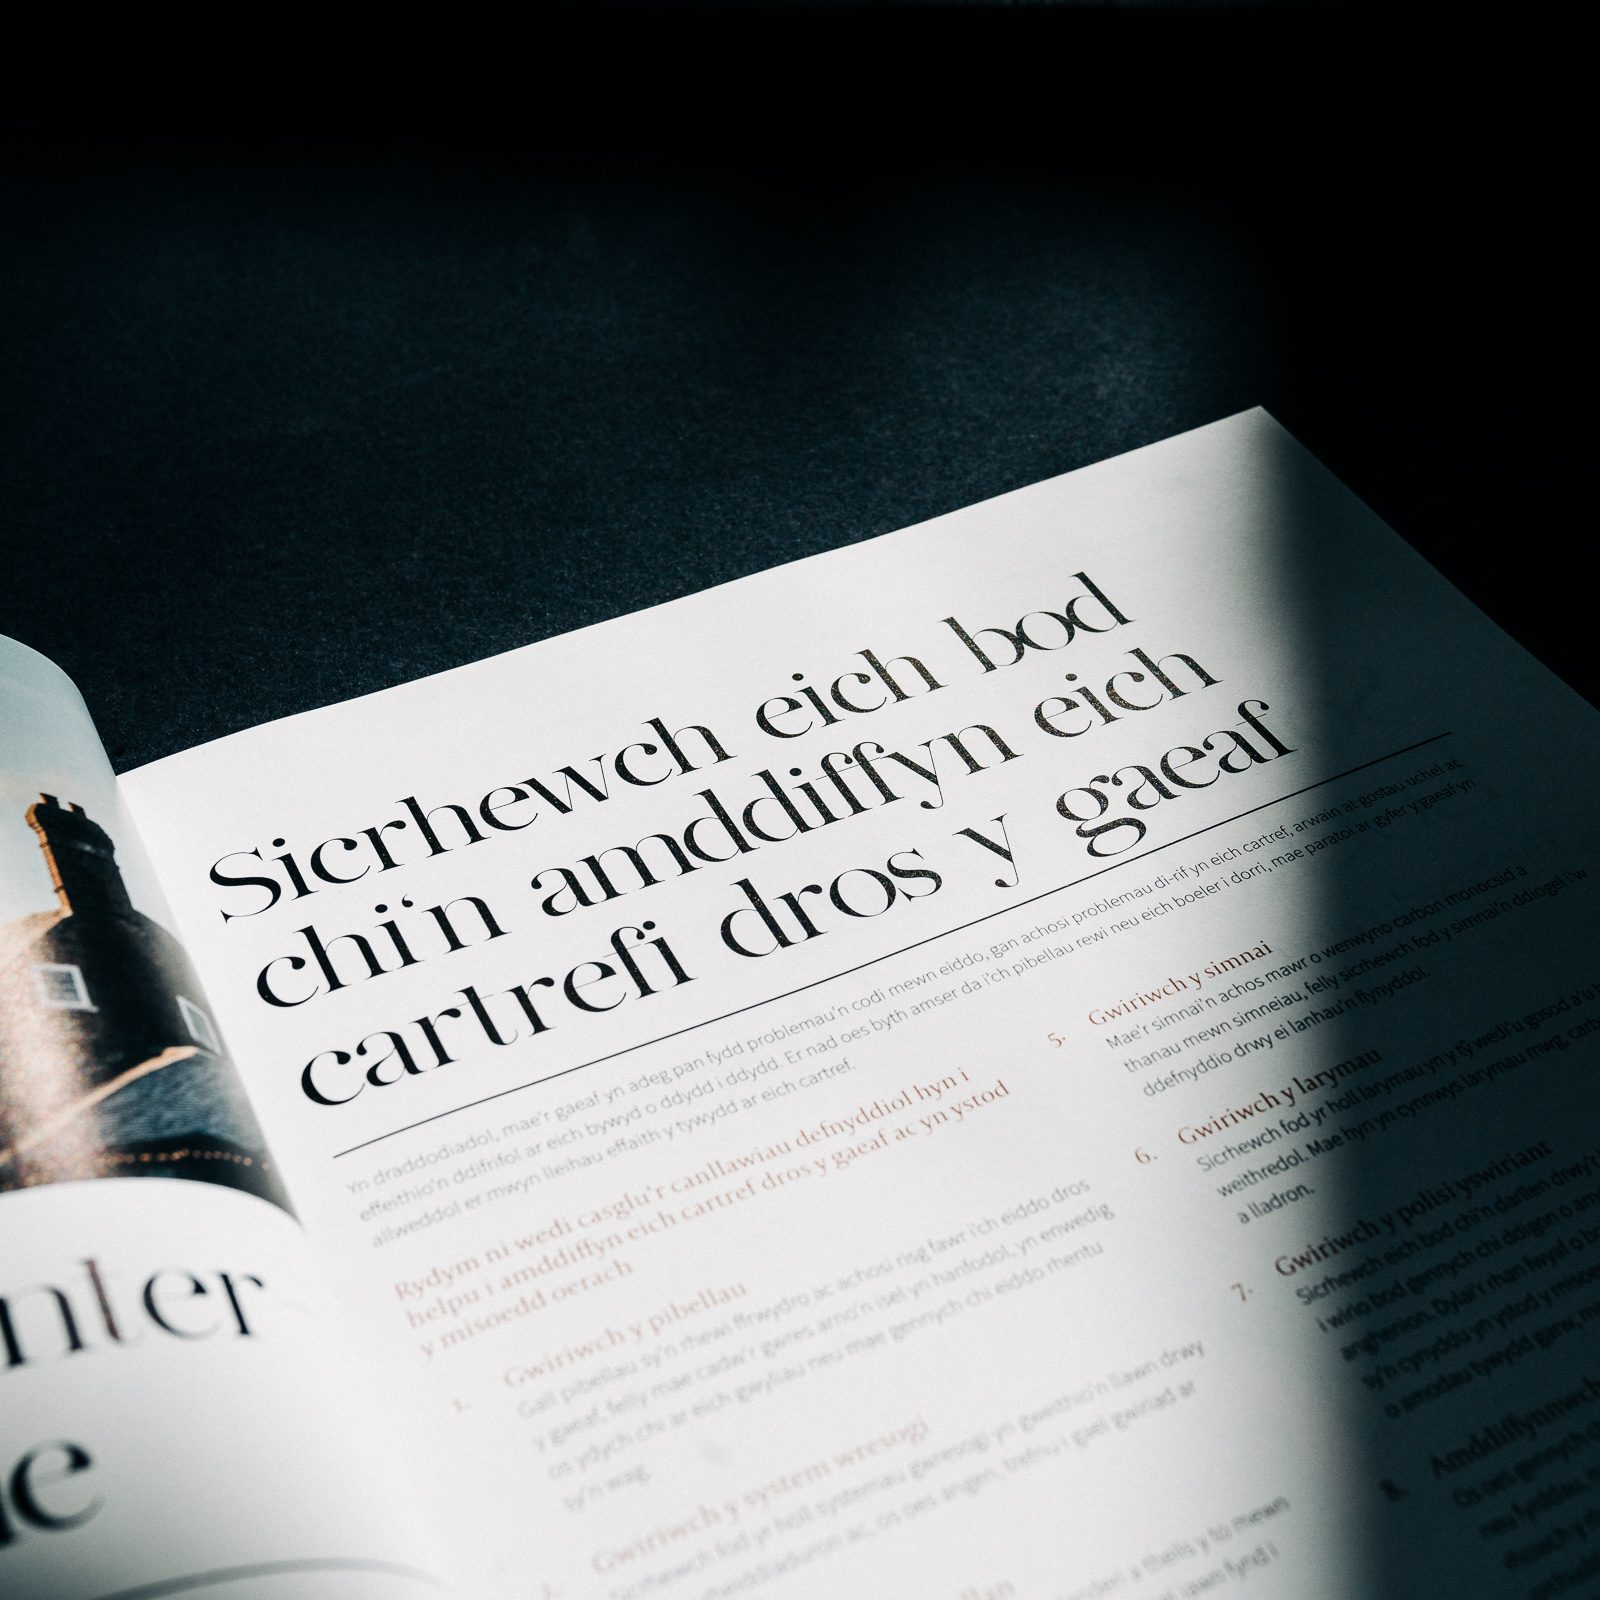 Open magazine featuring an article with text in multiple languages, dramatically lit under a beam of light on a dark background, courtesy of Design Agency Bristol.